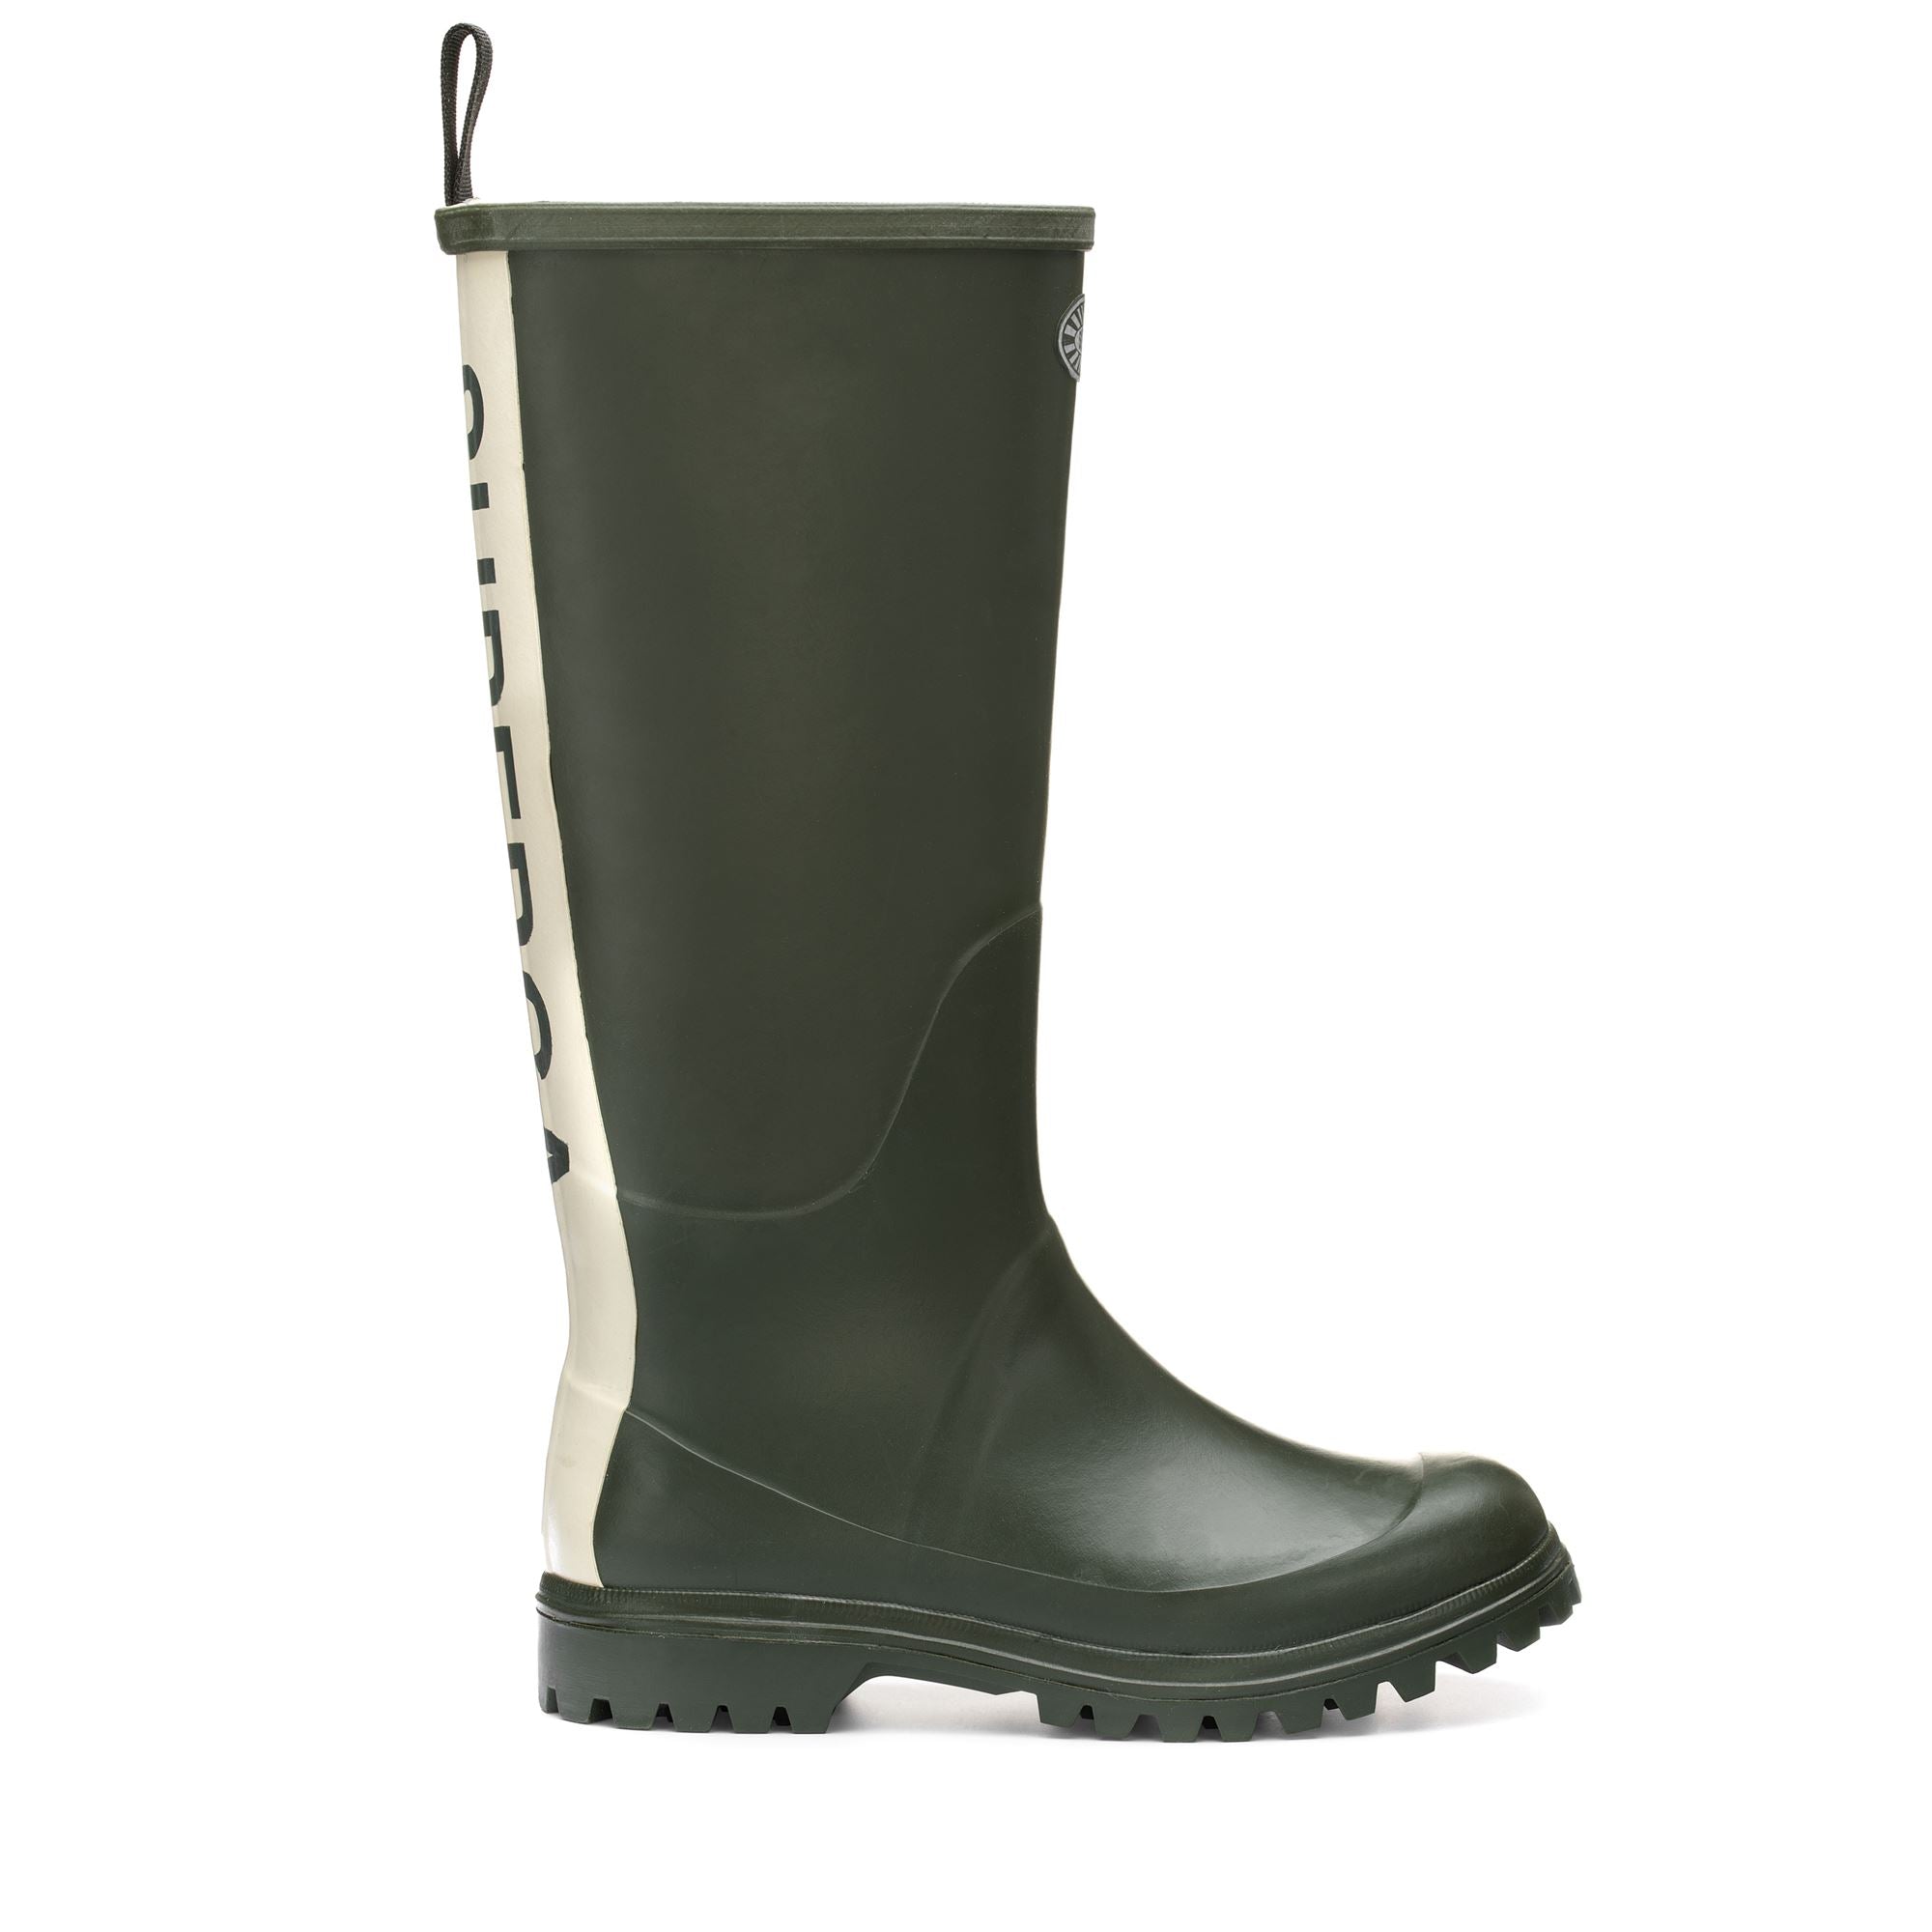 799 RUBBER BOOTS LETTERING - Rubber Boots - High Cut - Unisex - GREEN  SHERWOOD